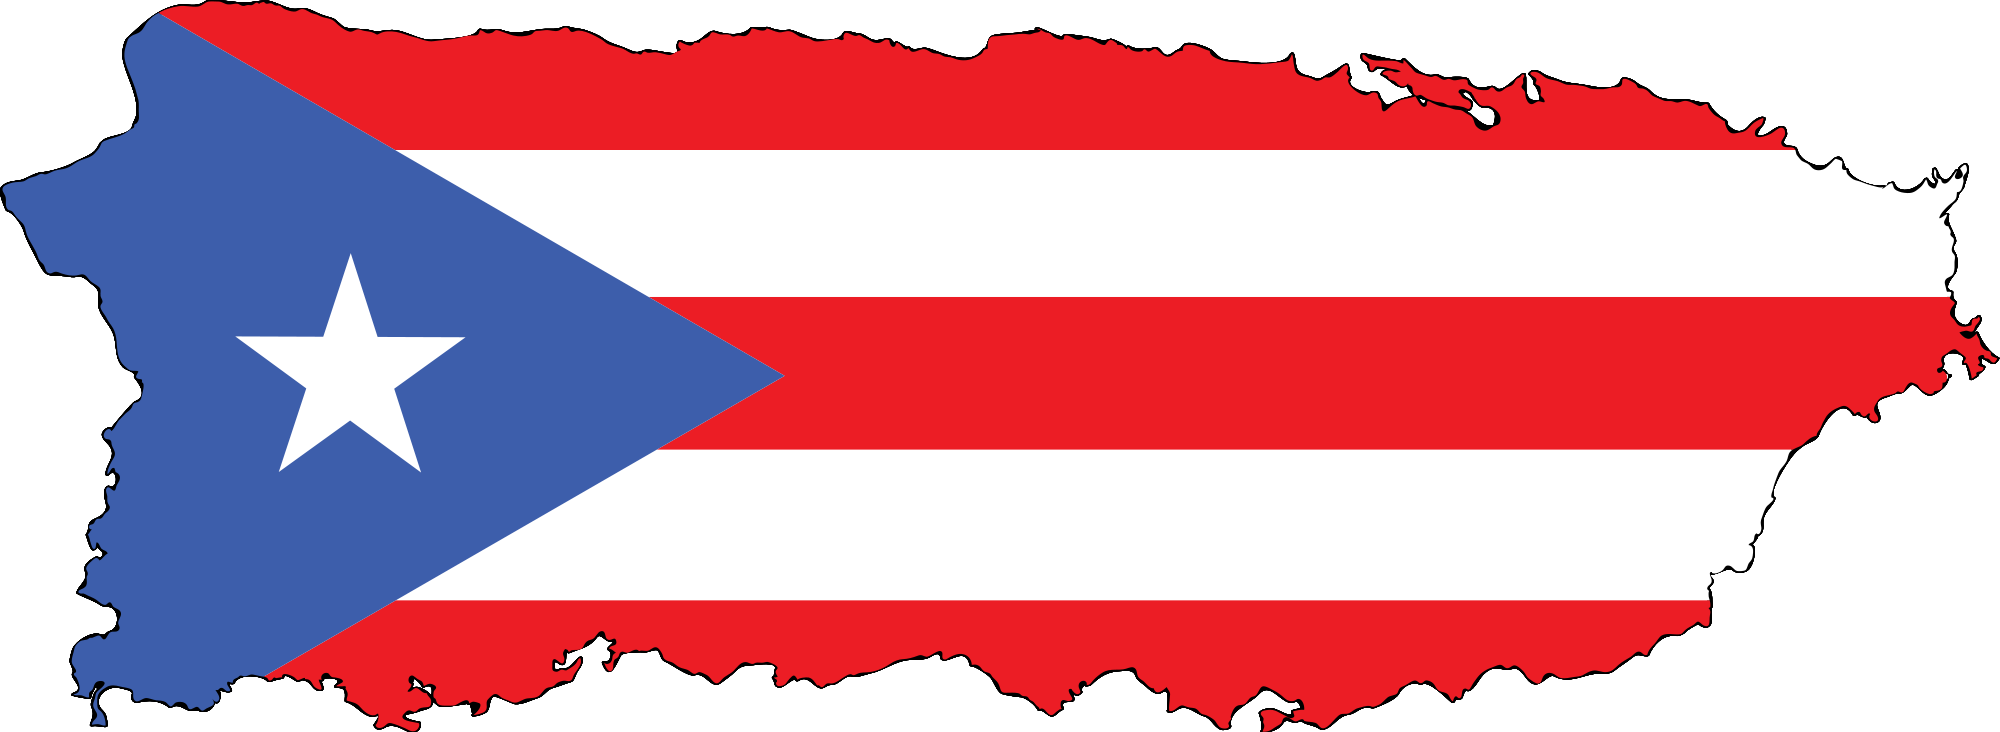 Puerto Rico svg #19, Download drawings